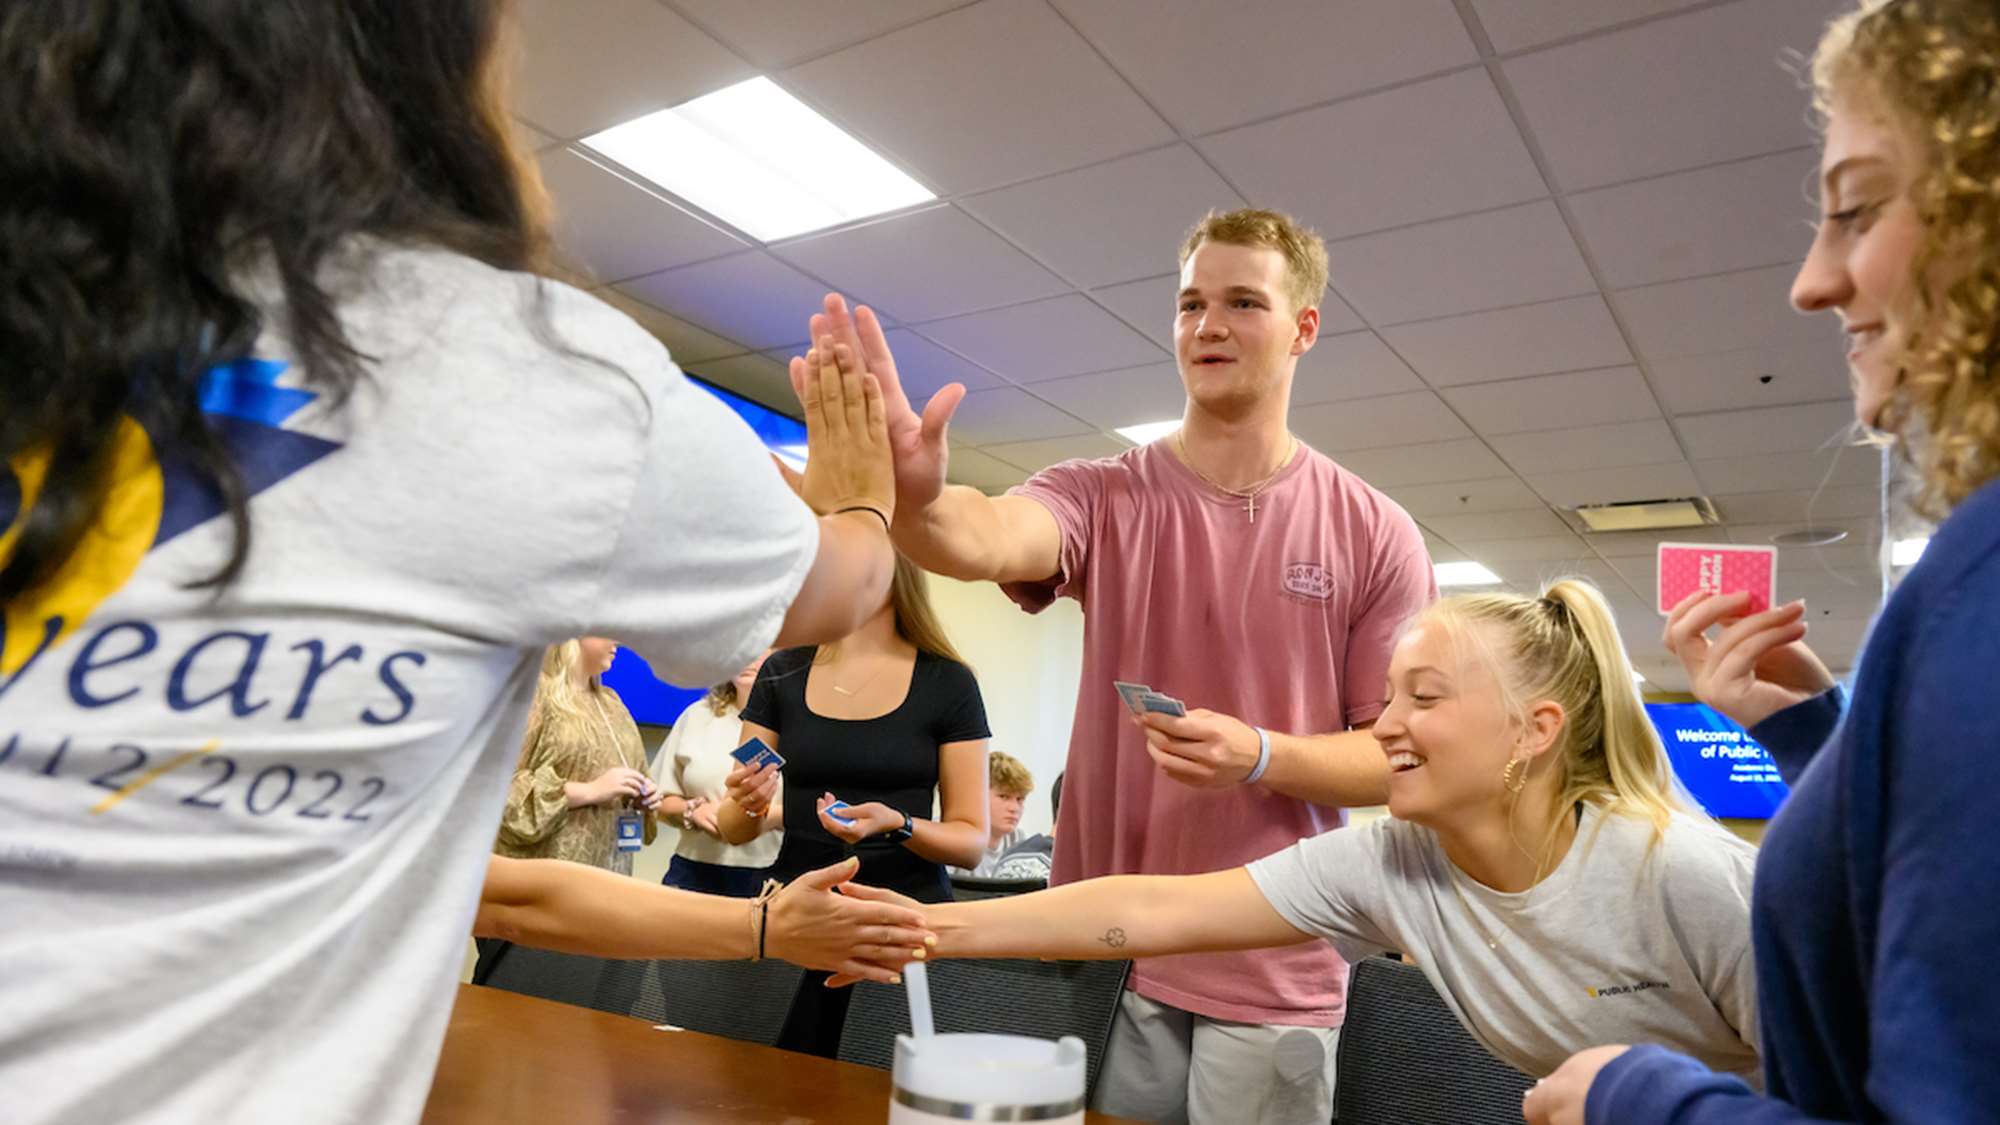 Students stand and touch hands across a table as they engage in a group activity 